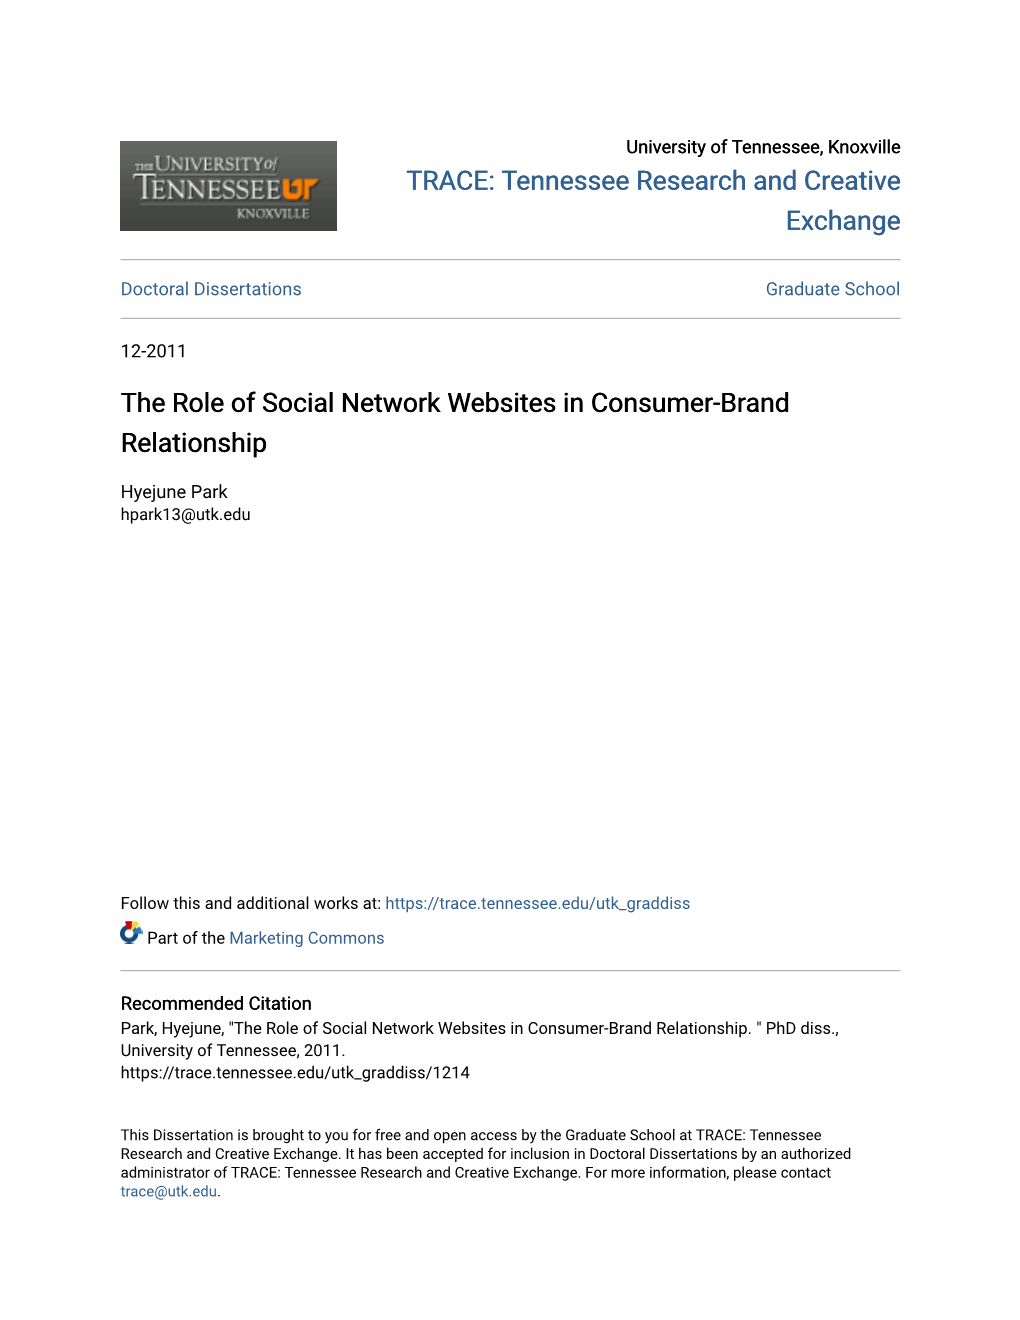 The Role of Social Network Websites in Consumer-Brand Relationship